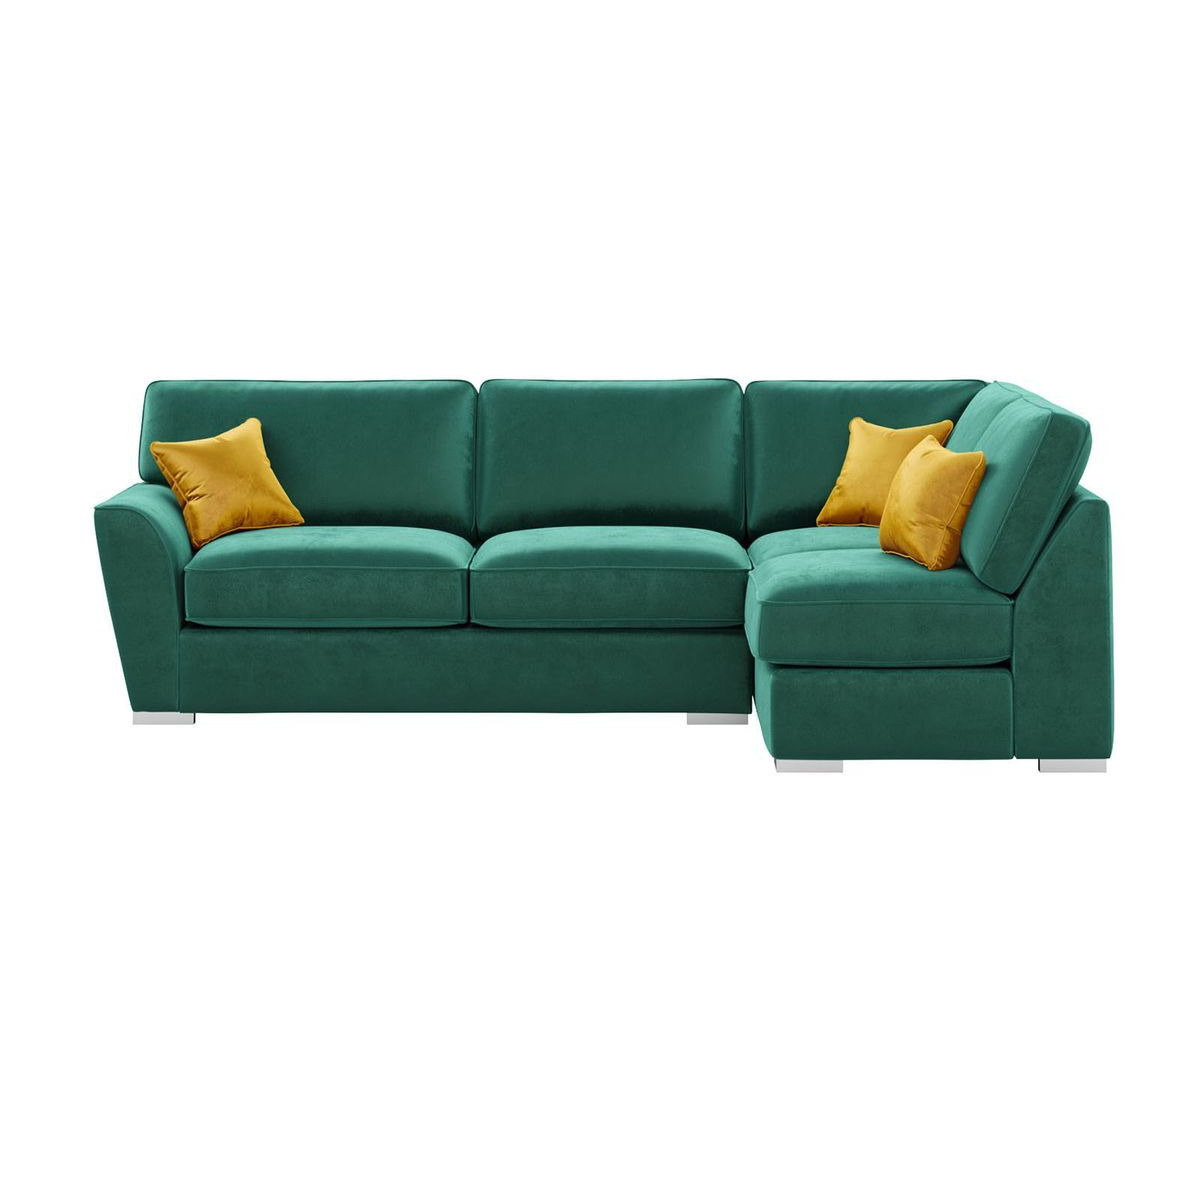 Majestic New Right Hand Corner Sofa with Fitted  Back Cushions, dark green/mustard - image 1